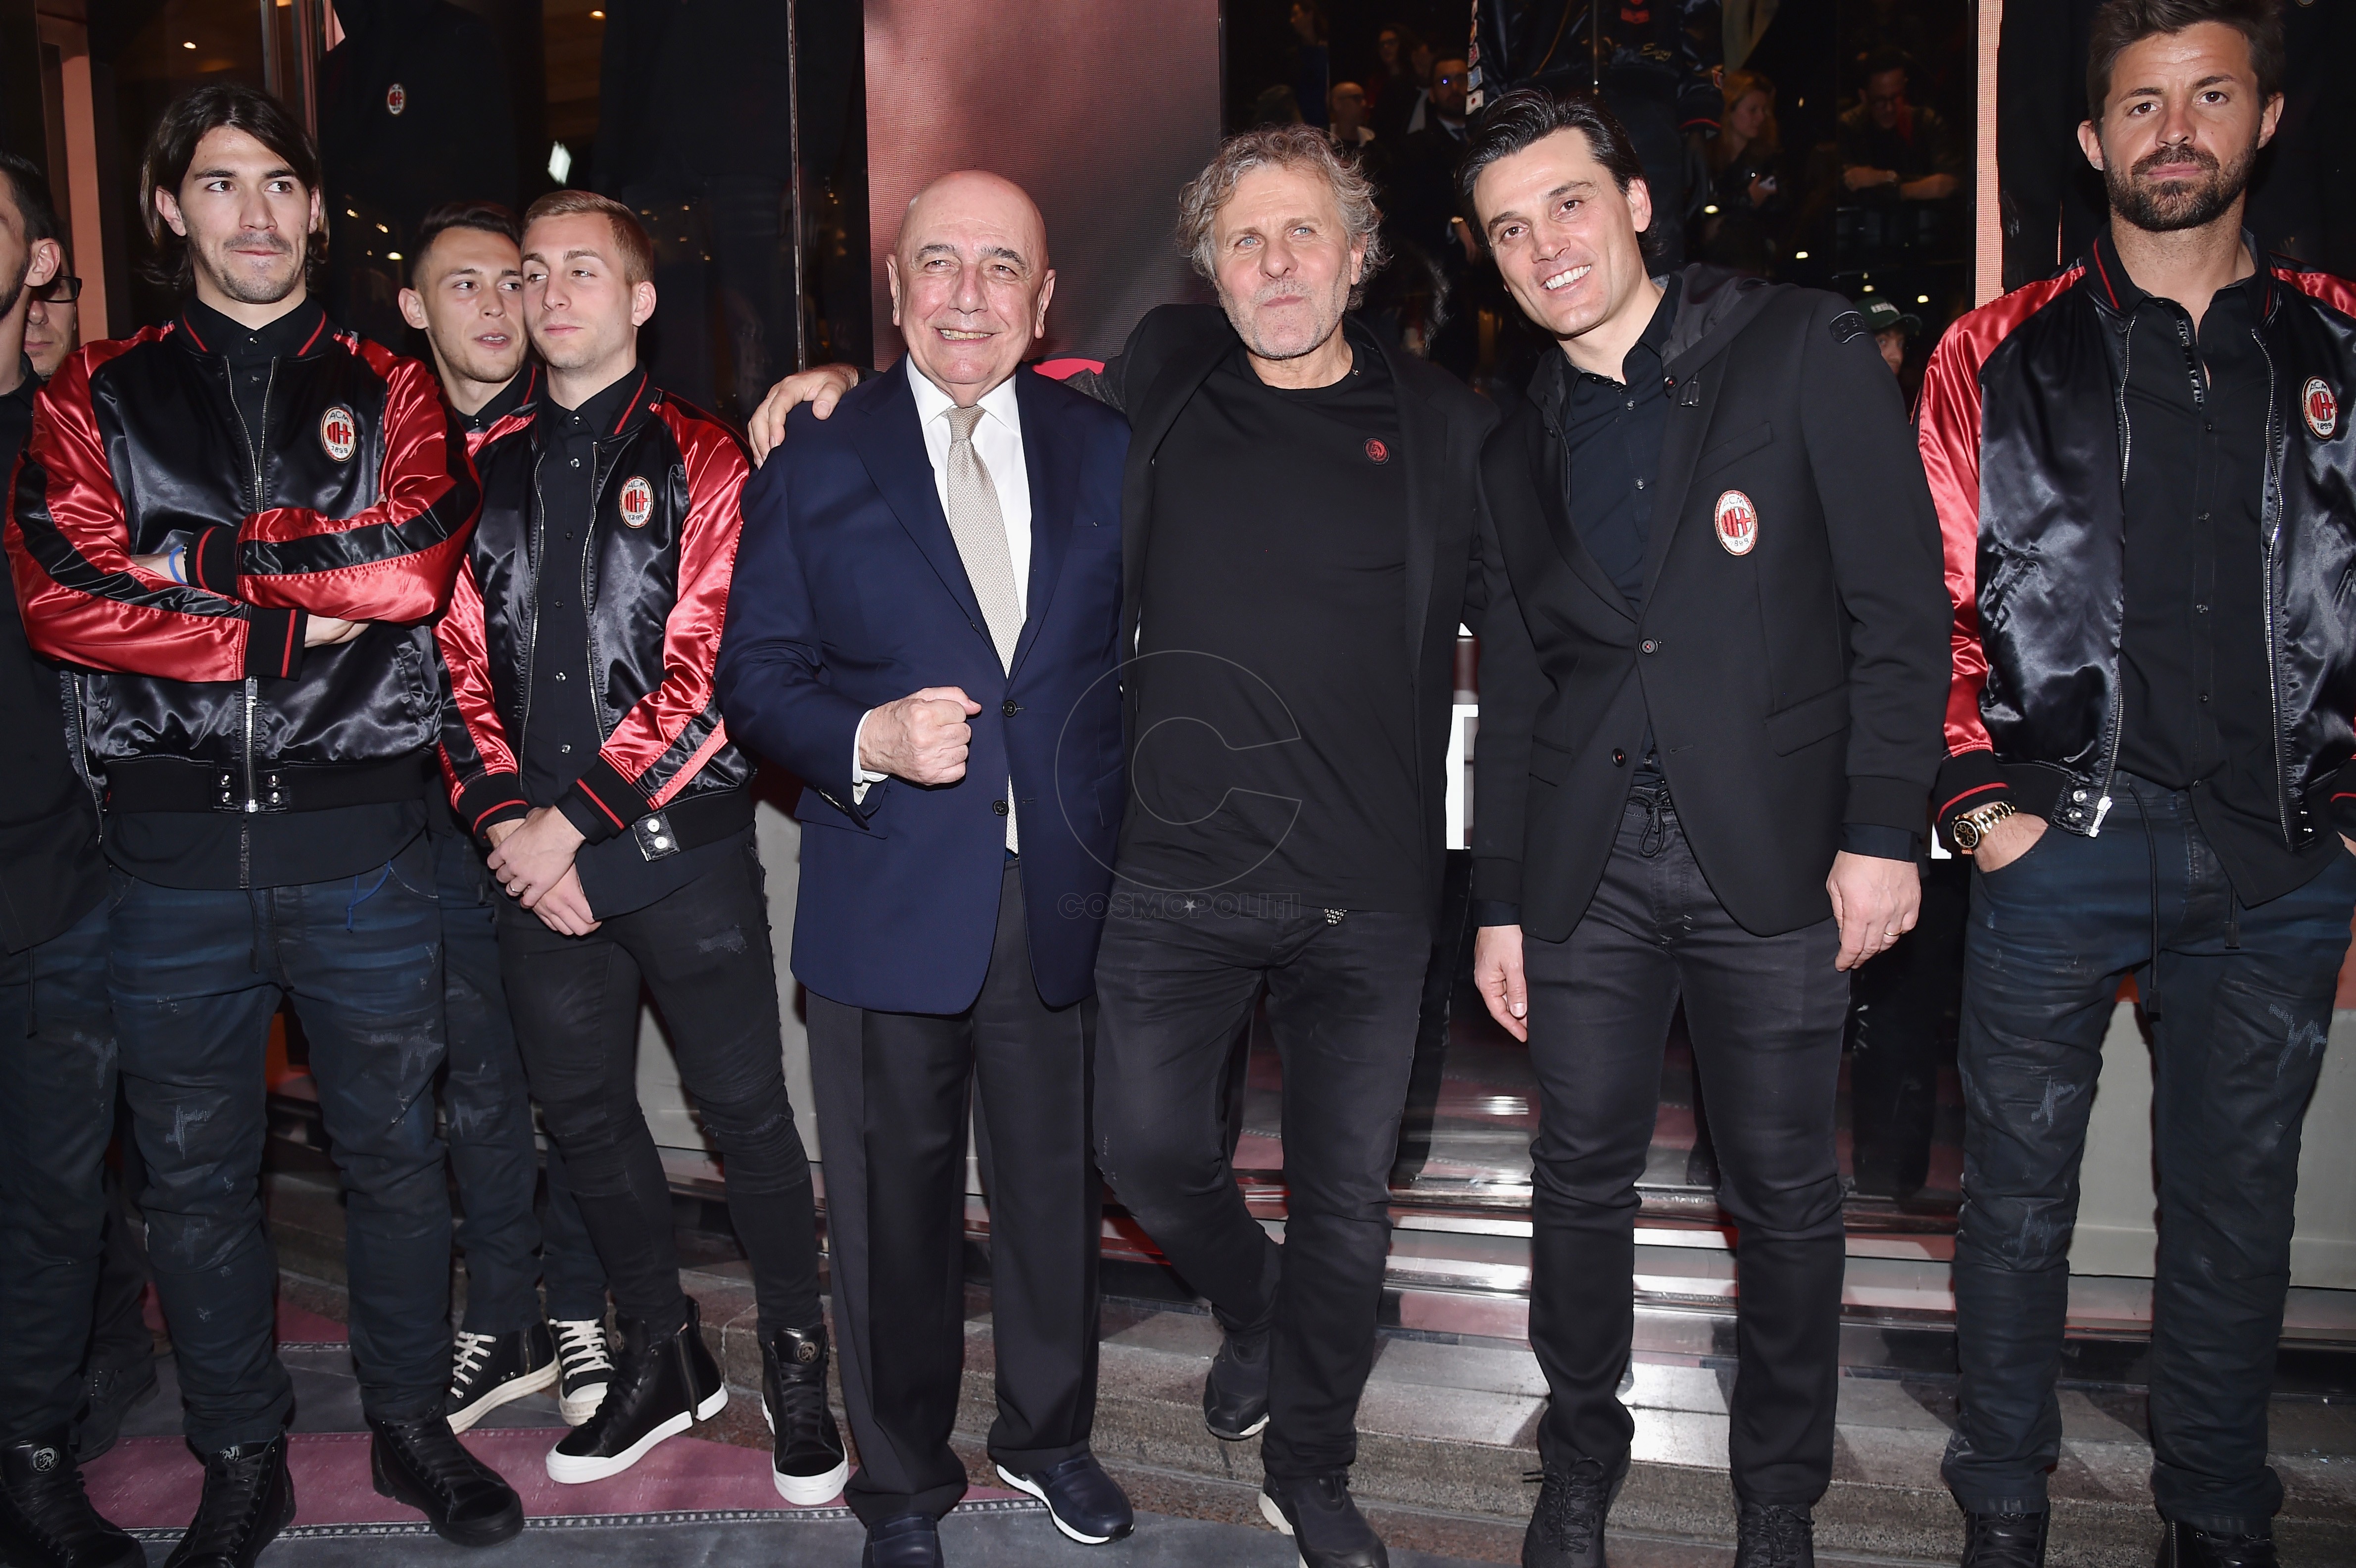 MILAN, ITALY - MARCH 14: (L-R) Alessio Romagnoli, Gerard Deulofeu, Adriano Galliani, Renzo Rosso, Vincenzo Montella and Marco Storari attend The New Bomber Presentation at the Diesel Store on March 14, 2017 in Milan, Italy. (Photo by Jacopo Raule/Getty Images for Diesel)